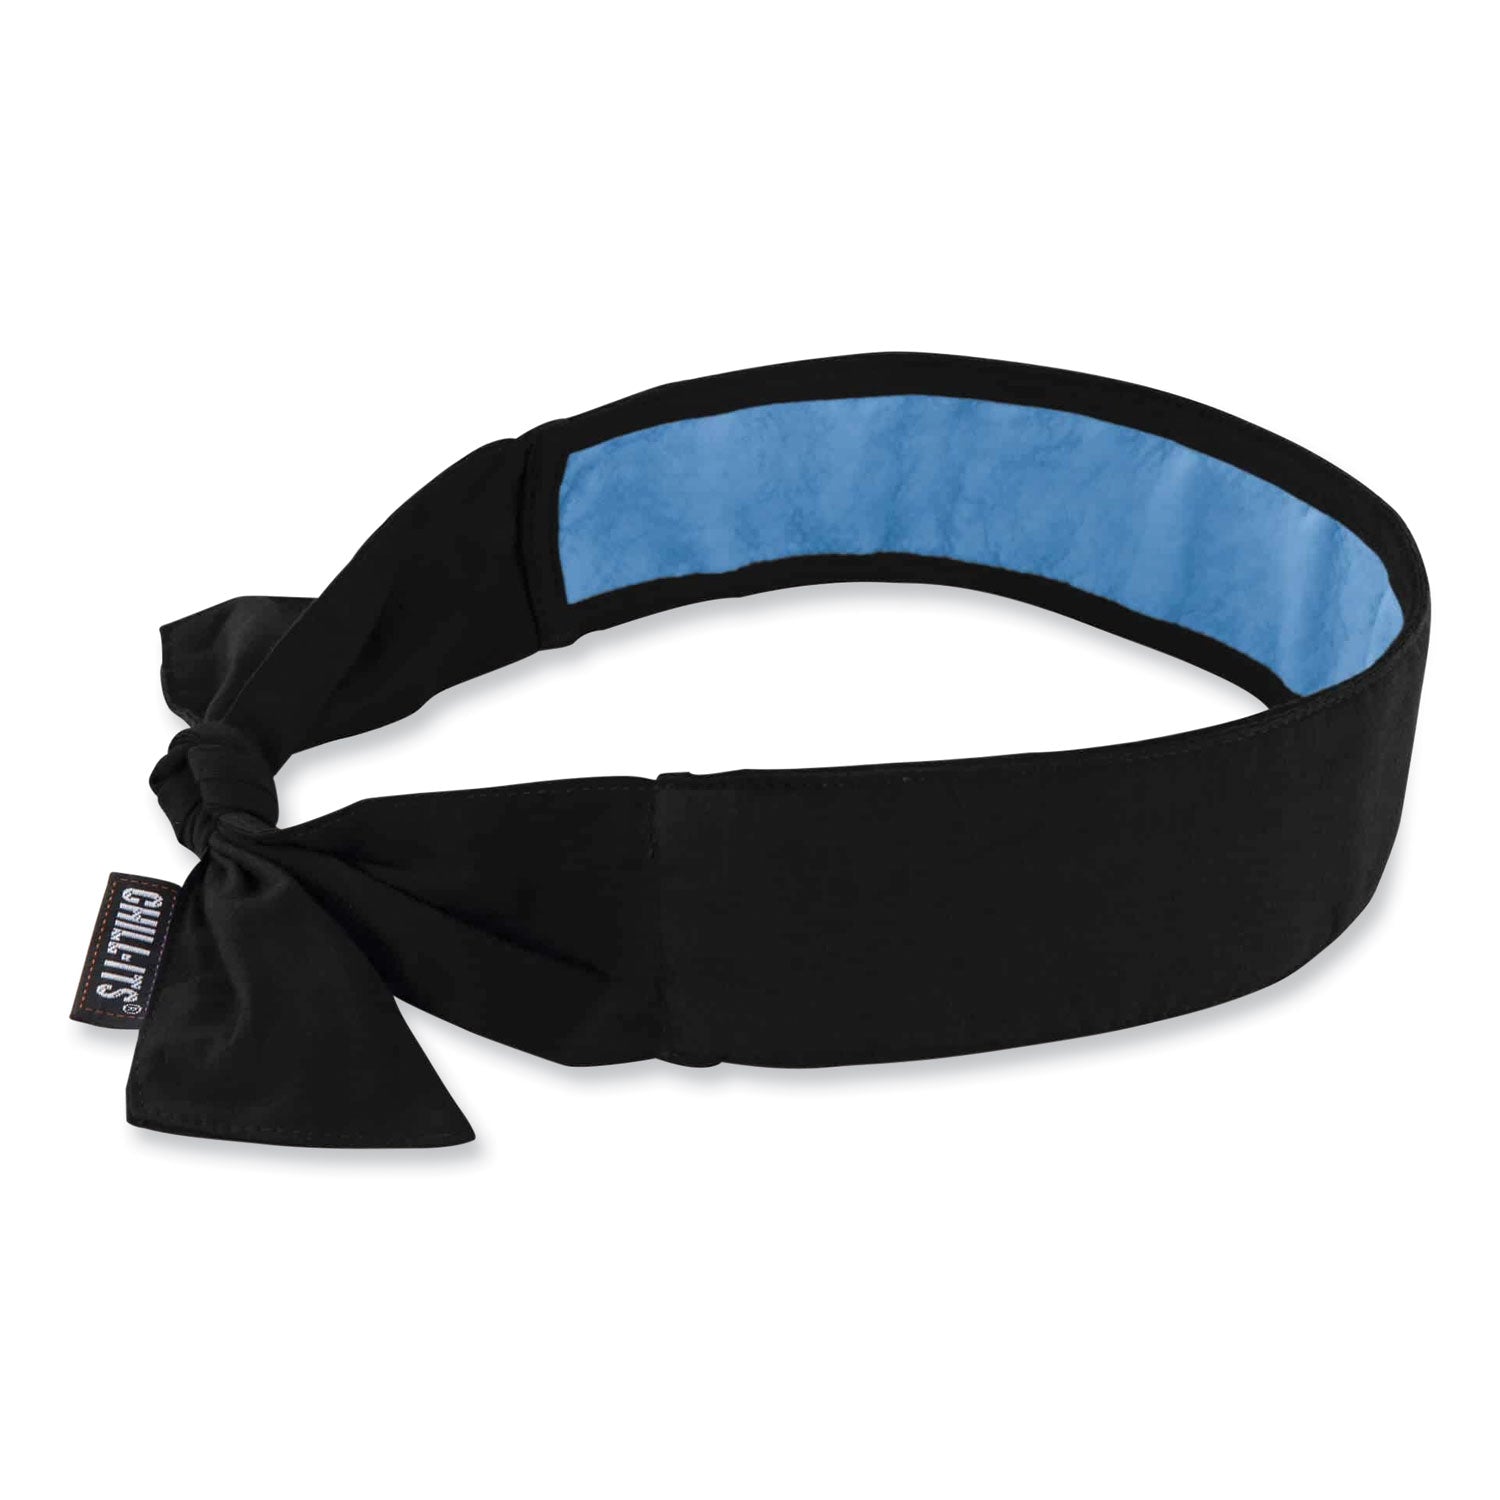 chill-its-6700ct-cooling-bandana-pva-tie-headband-one-size-fits-most-black-ships-in-1-3-business-days_ego12565 - 1